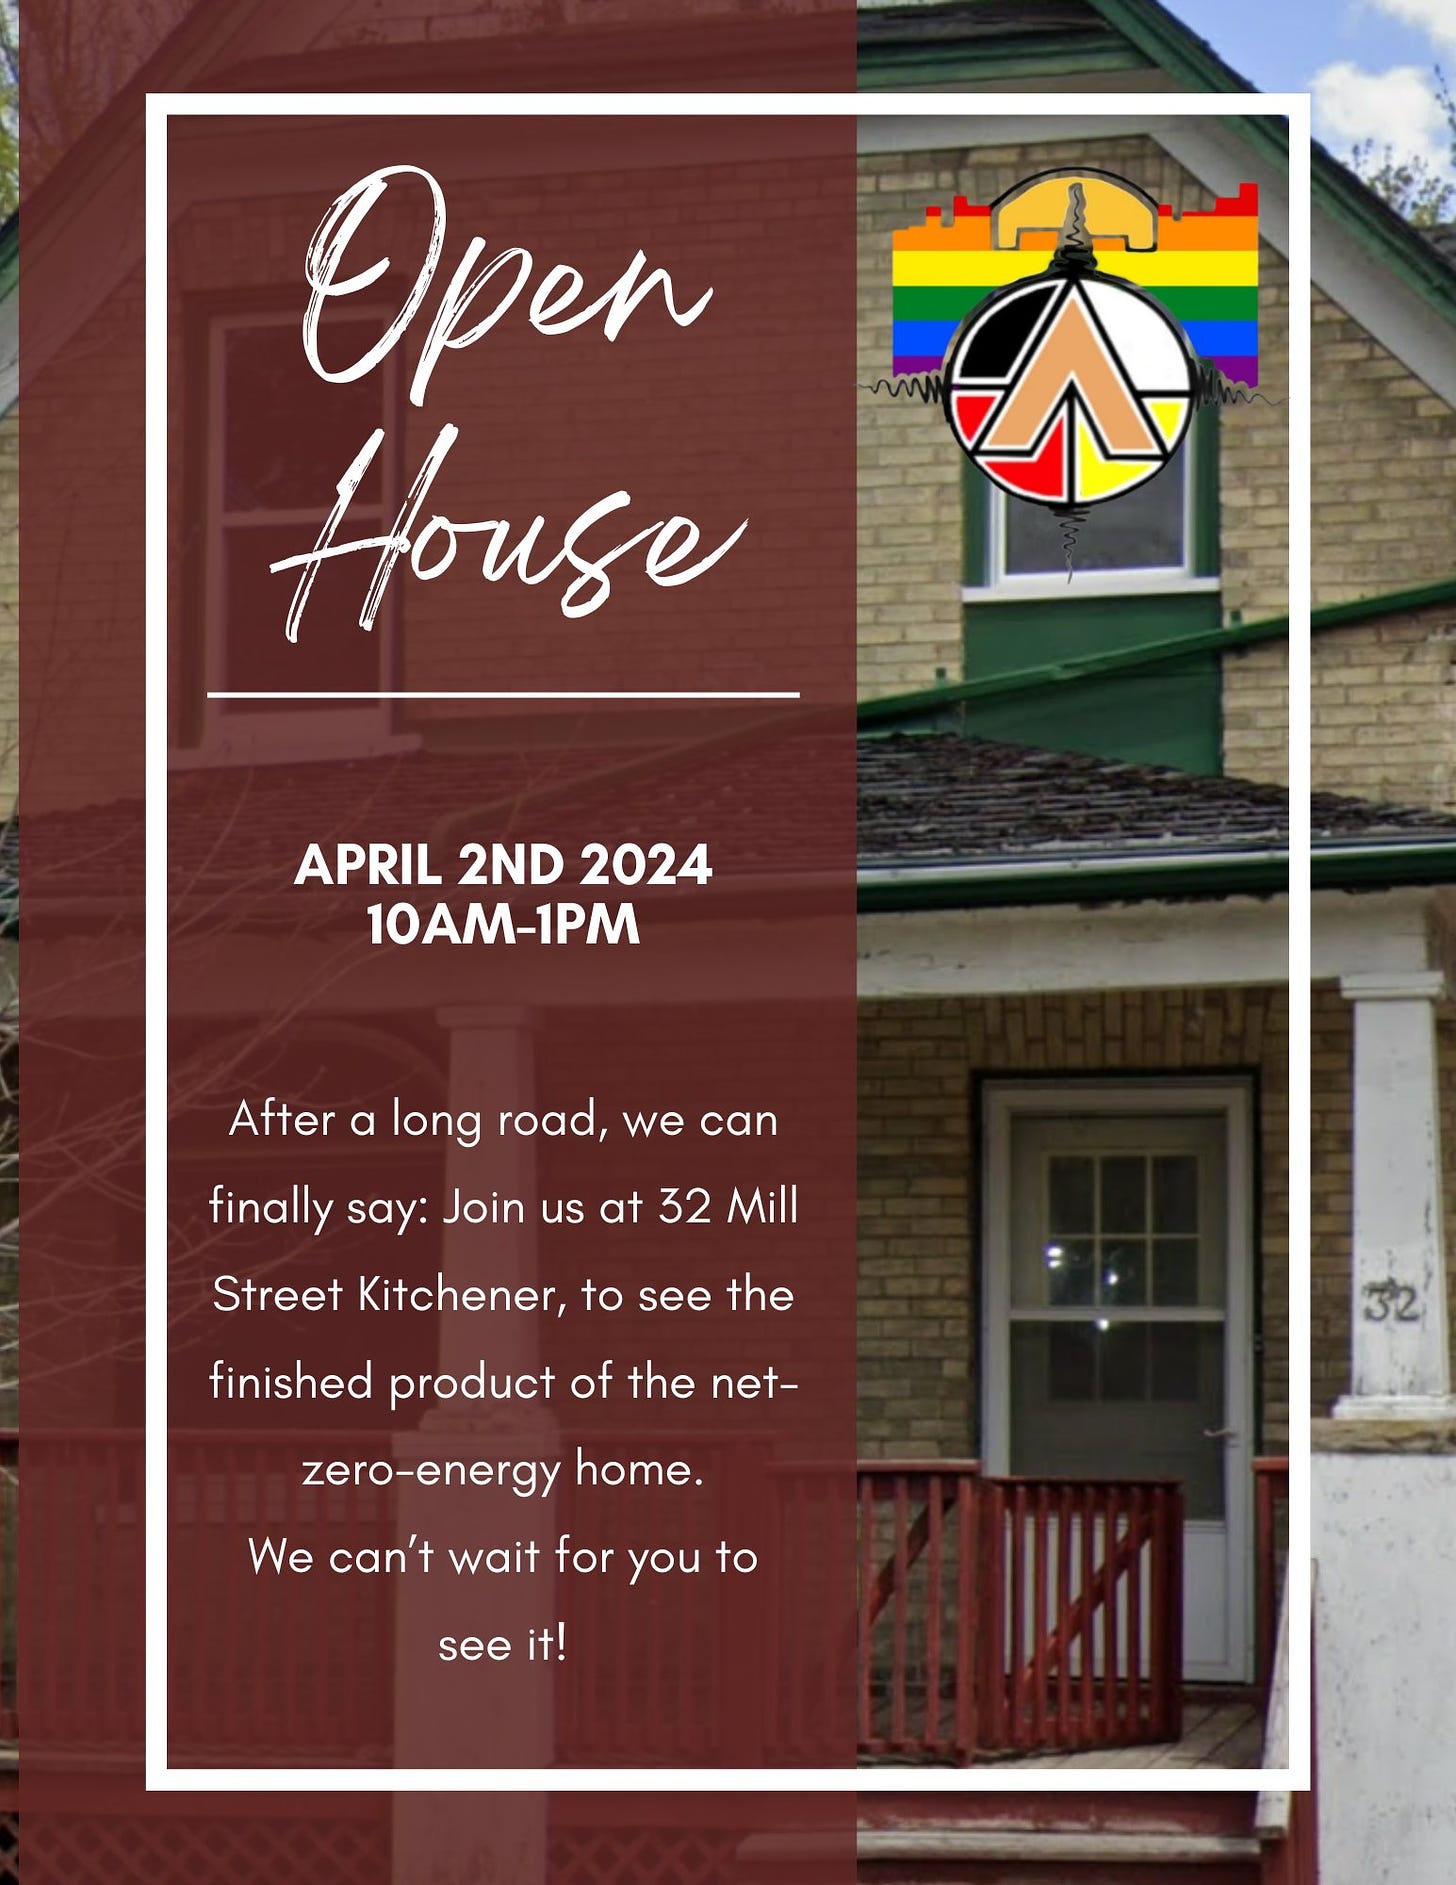 Image of the Open House Poster.